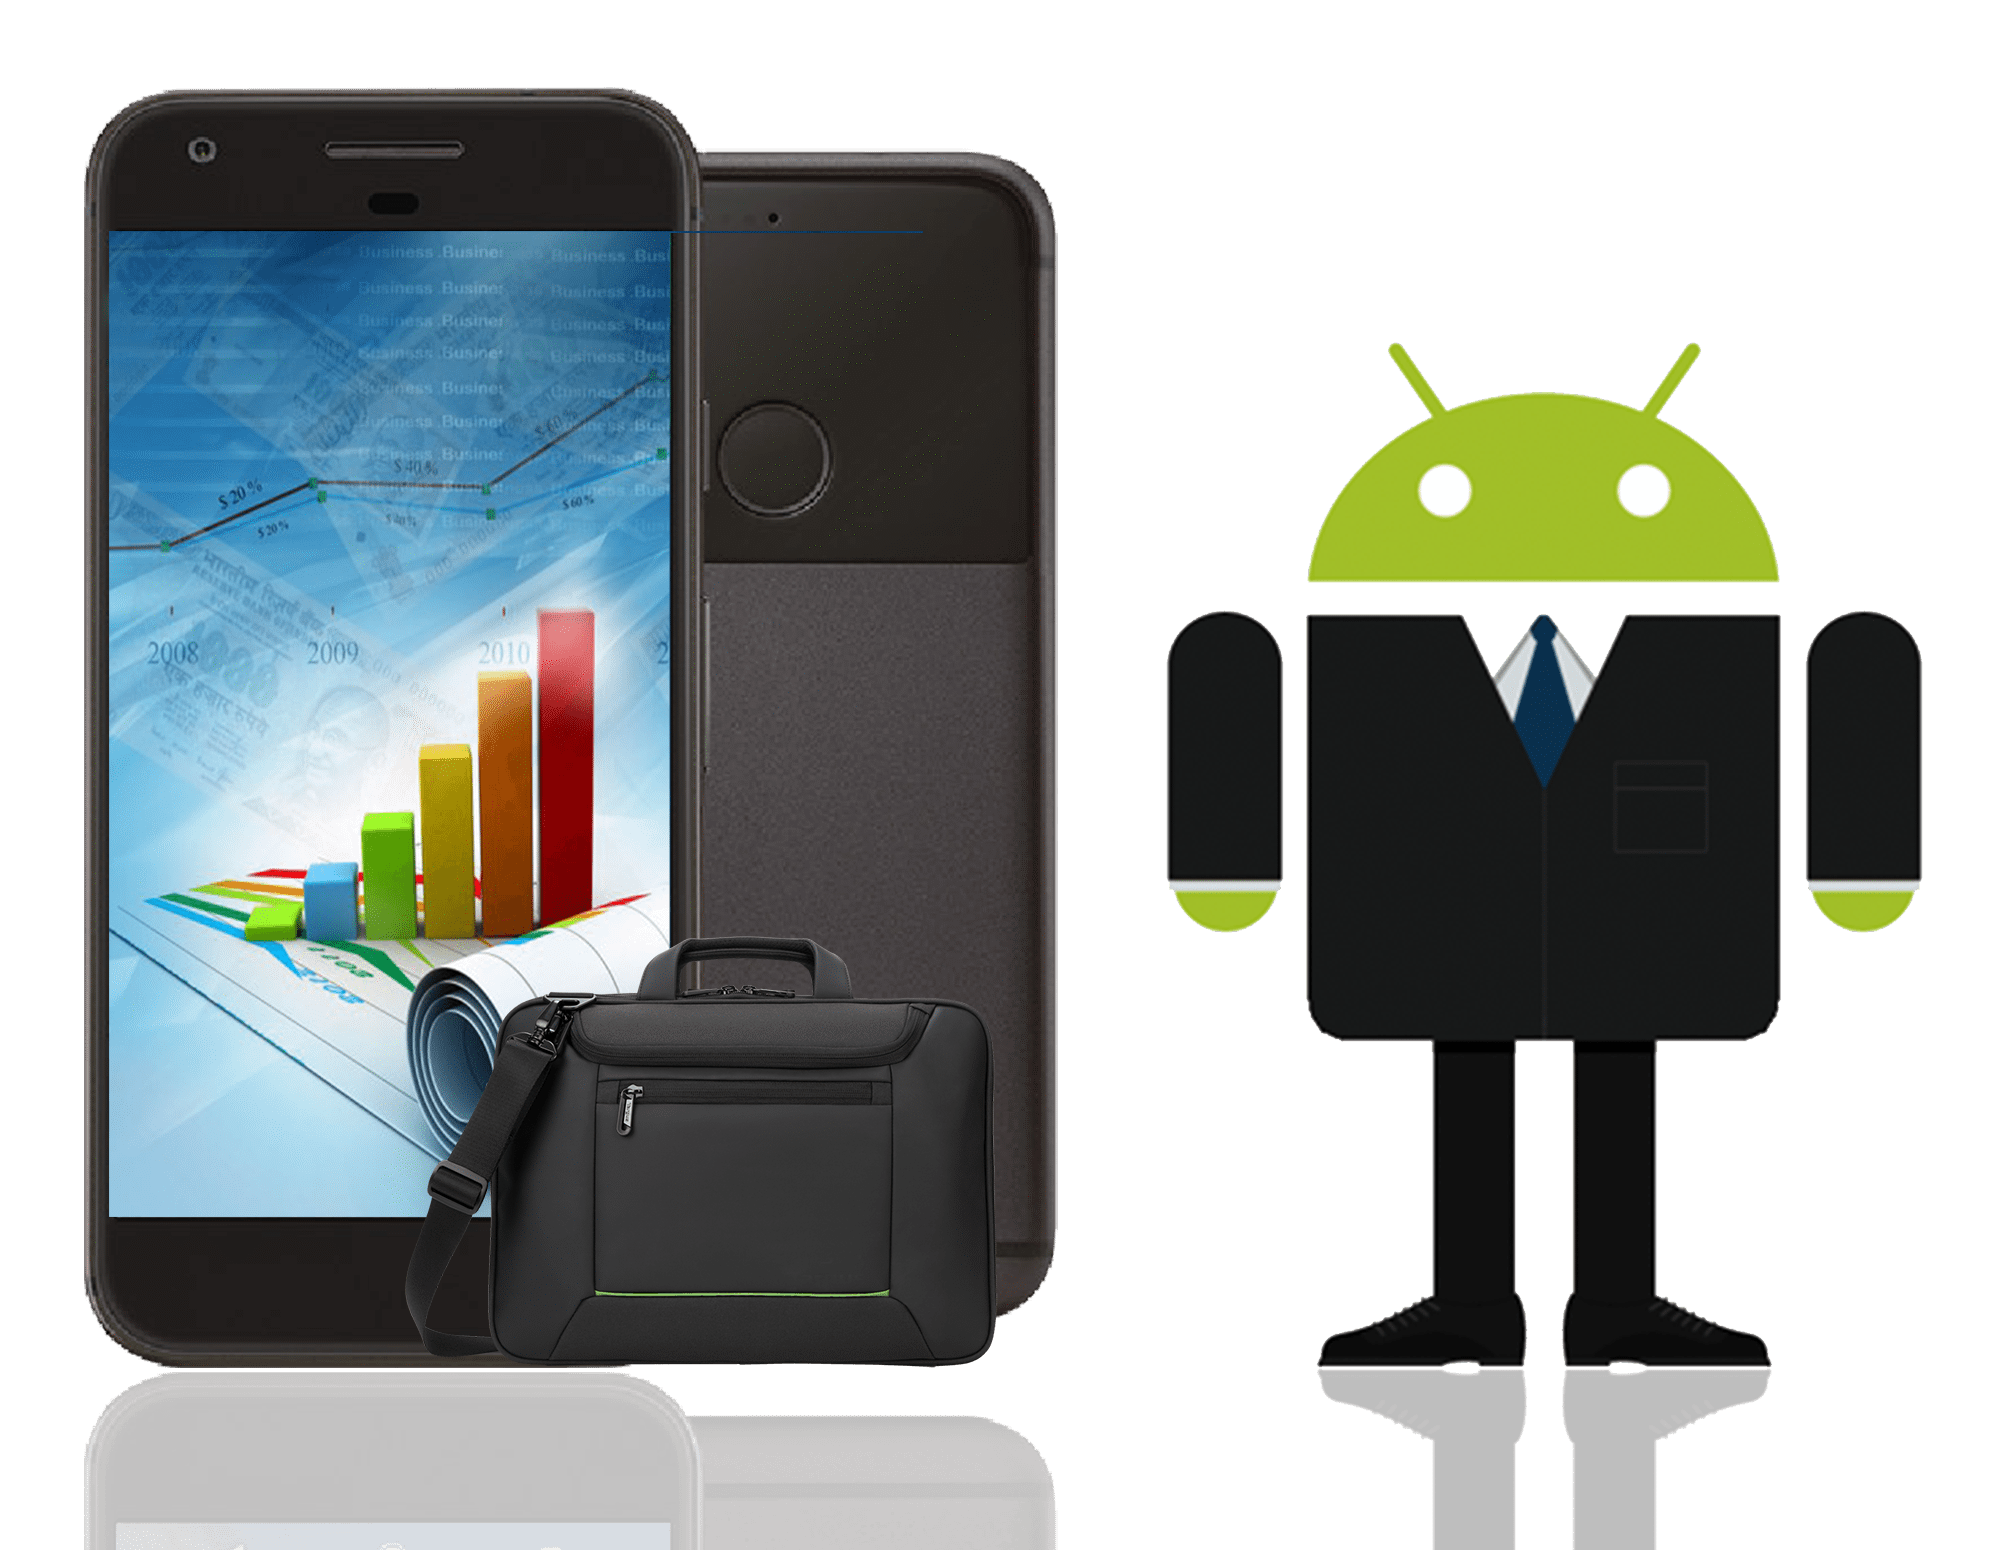 android business application